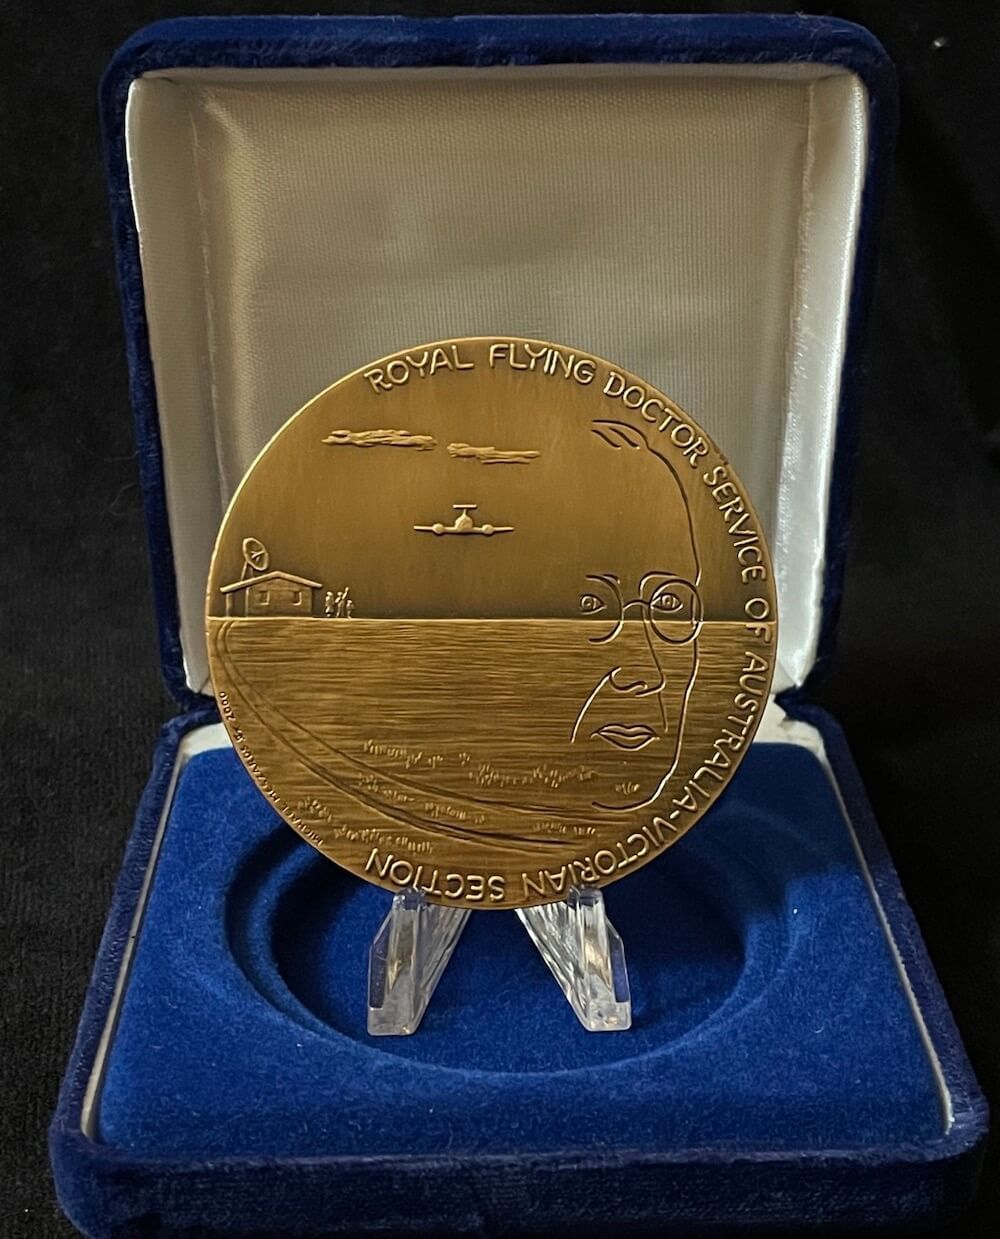 2000 Bronze Medal Royal Flying Doctor Service Victoria 64mm product image